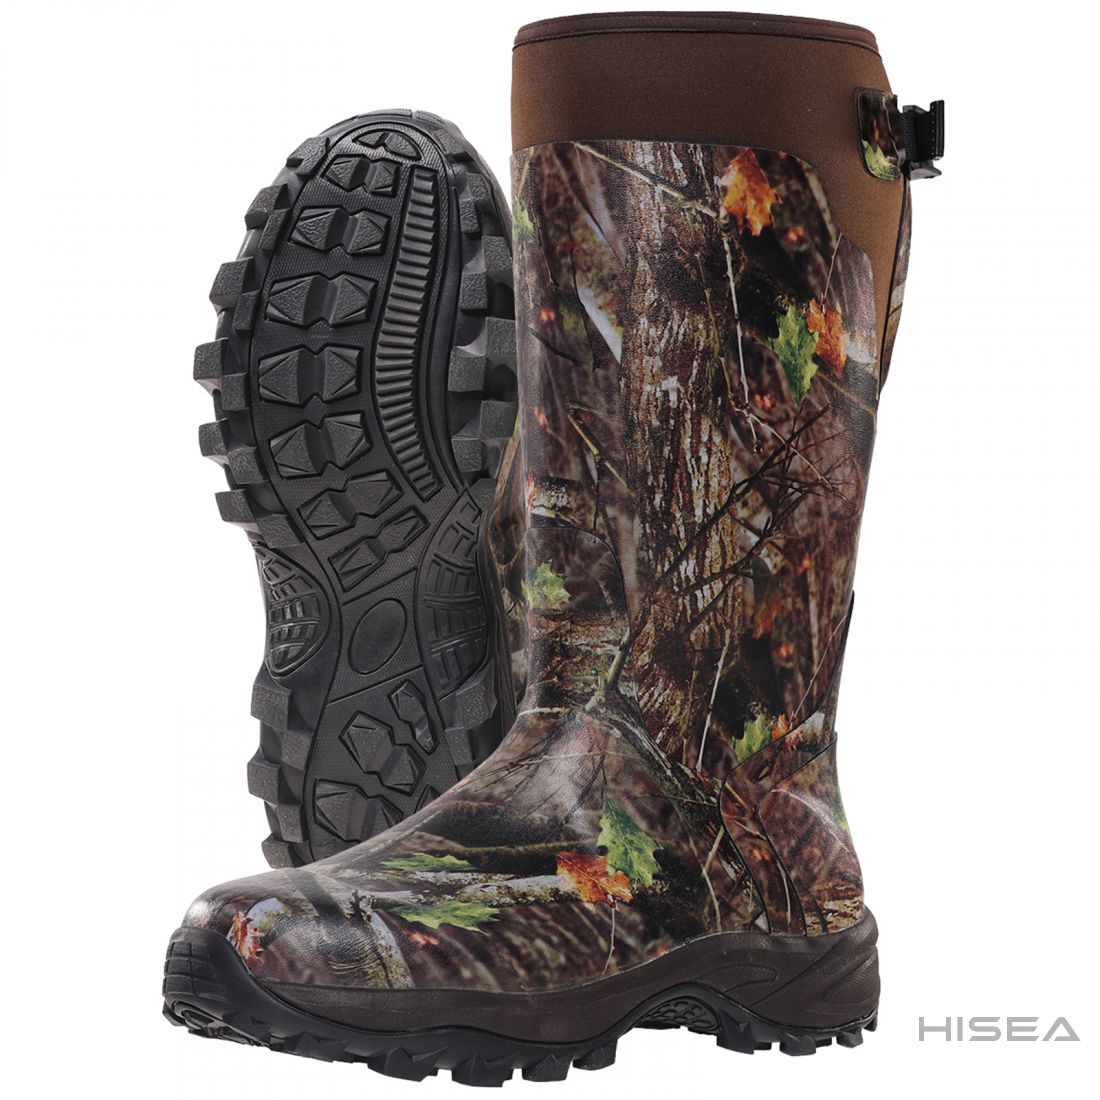 Apollo Basic Insulated Hunting Boots